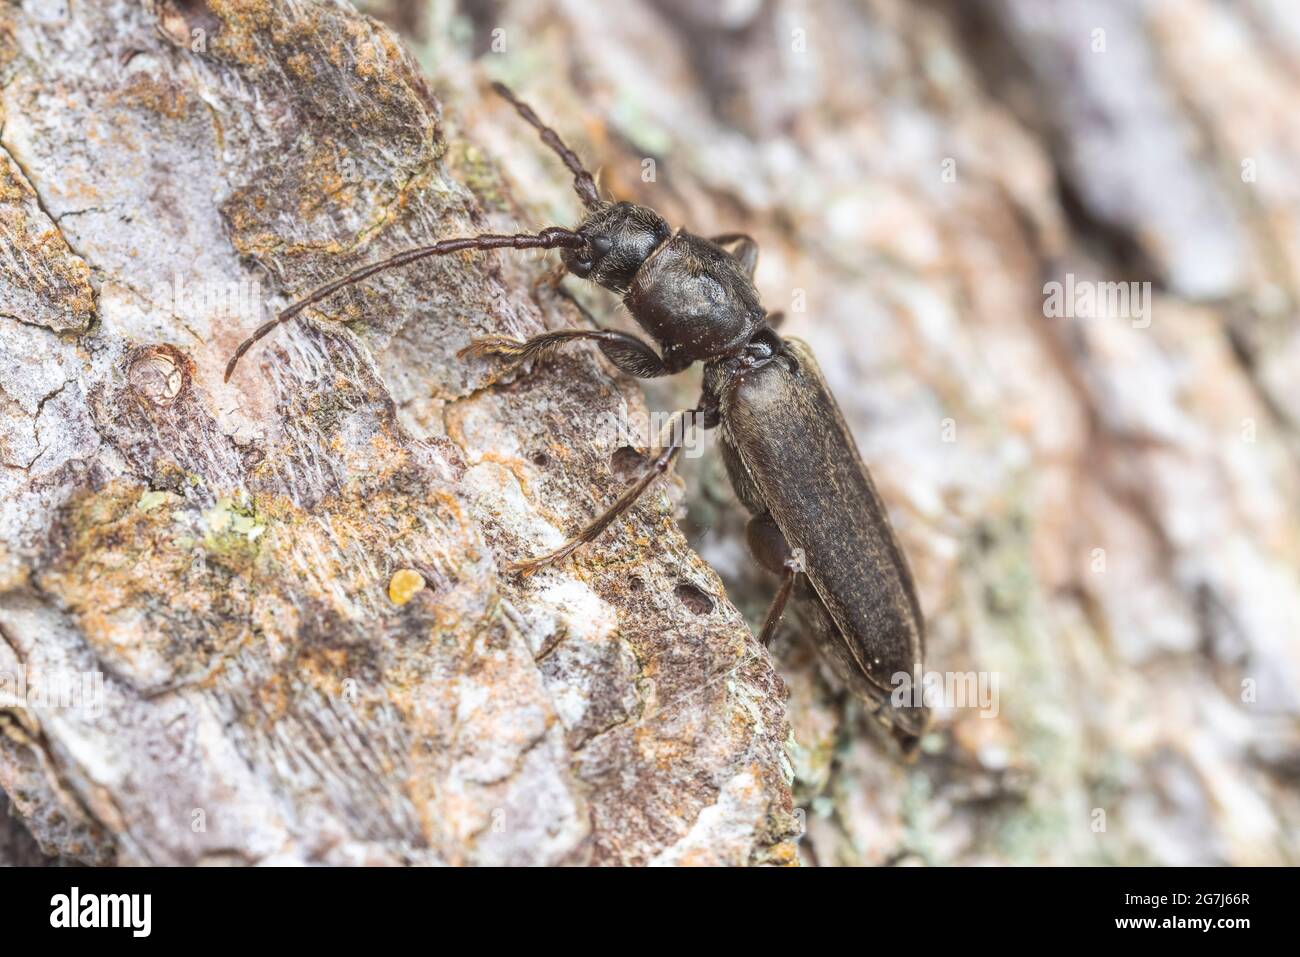 A Long-horned Beetle (Tetropium schwarzianum) on the side of a dead Eastern White Pine (Pinus strobus) tree. Stock Photo